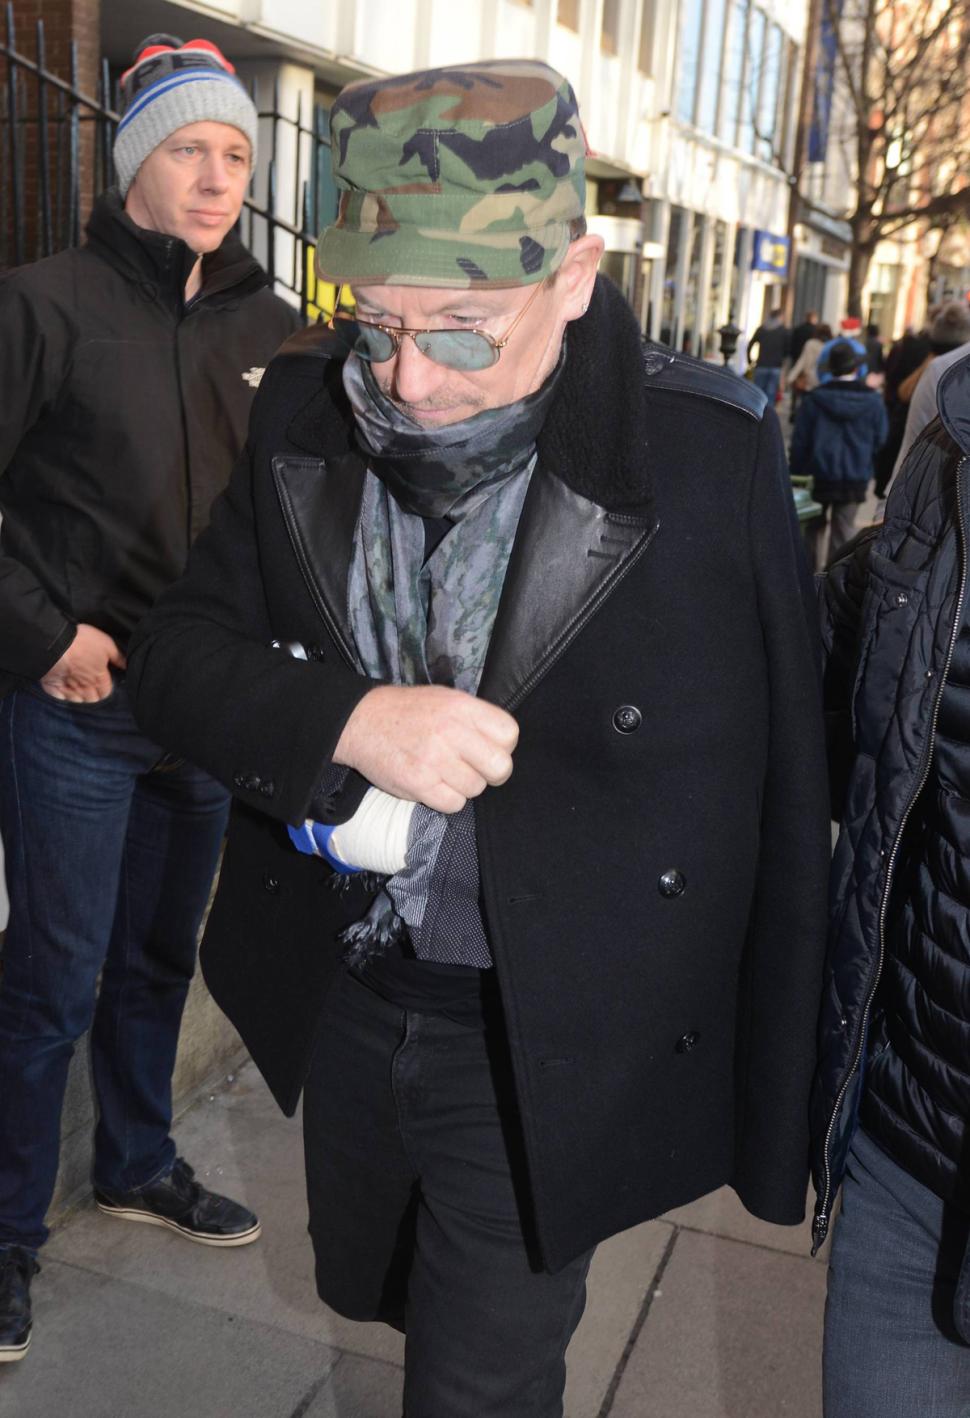 Bono, with his injured arm in a sling, in Dublin, Ireland, on Dec. 24. The singer said he's not sure if he'll ever play guitar again due to injuries suffered in a bike crash.